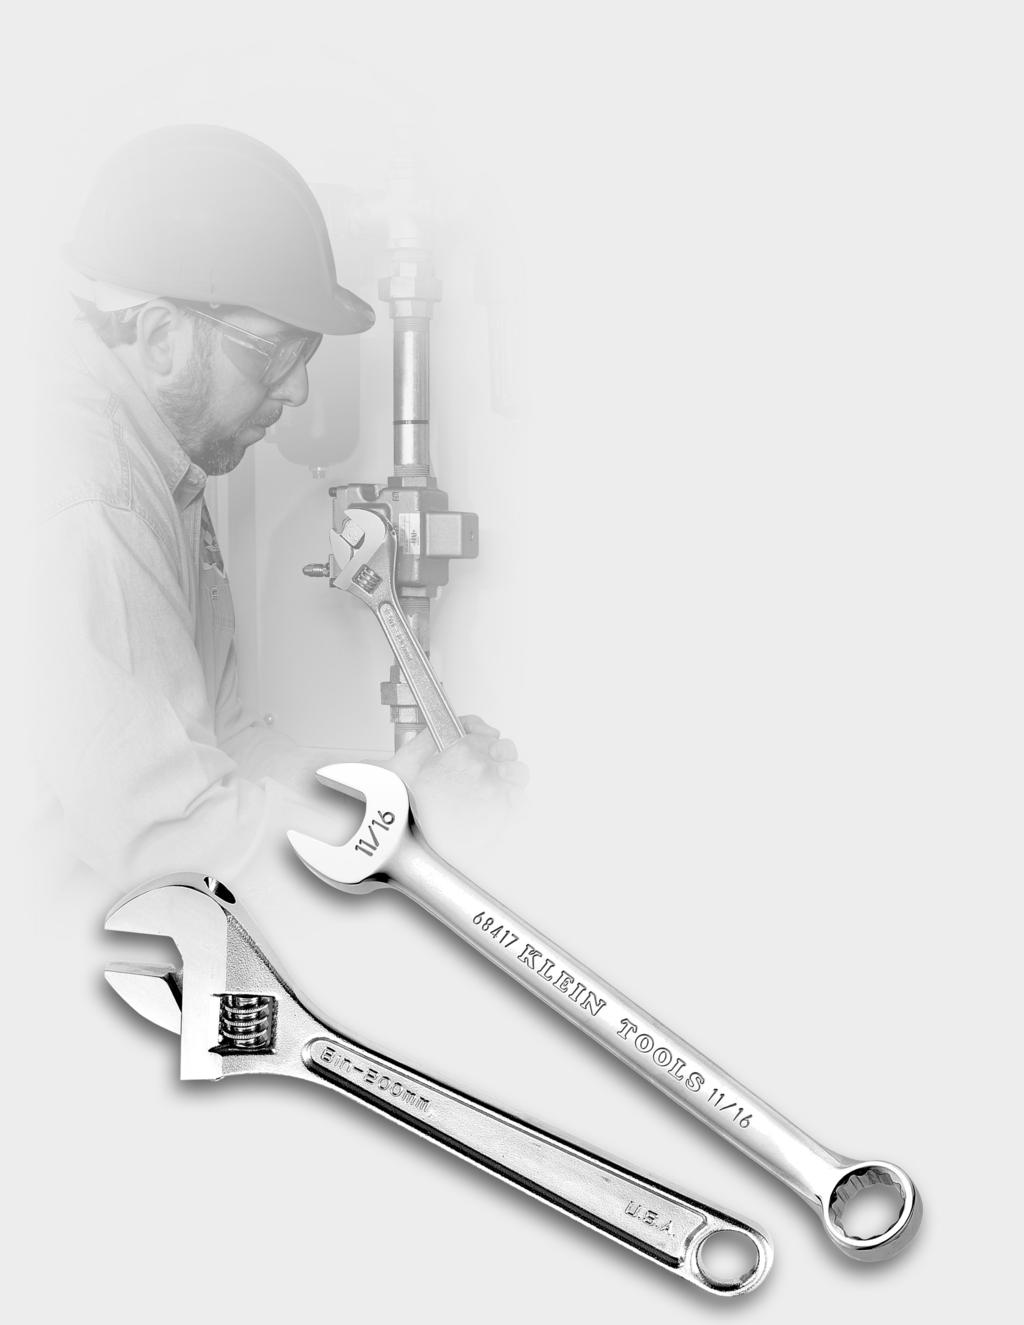 F o r P r o f e Klein s line of wrenches are forged from the finest steel and are designed to deliver great strength, and long working life.